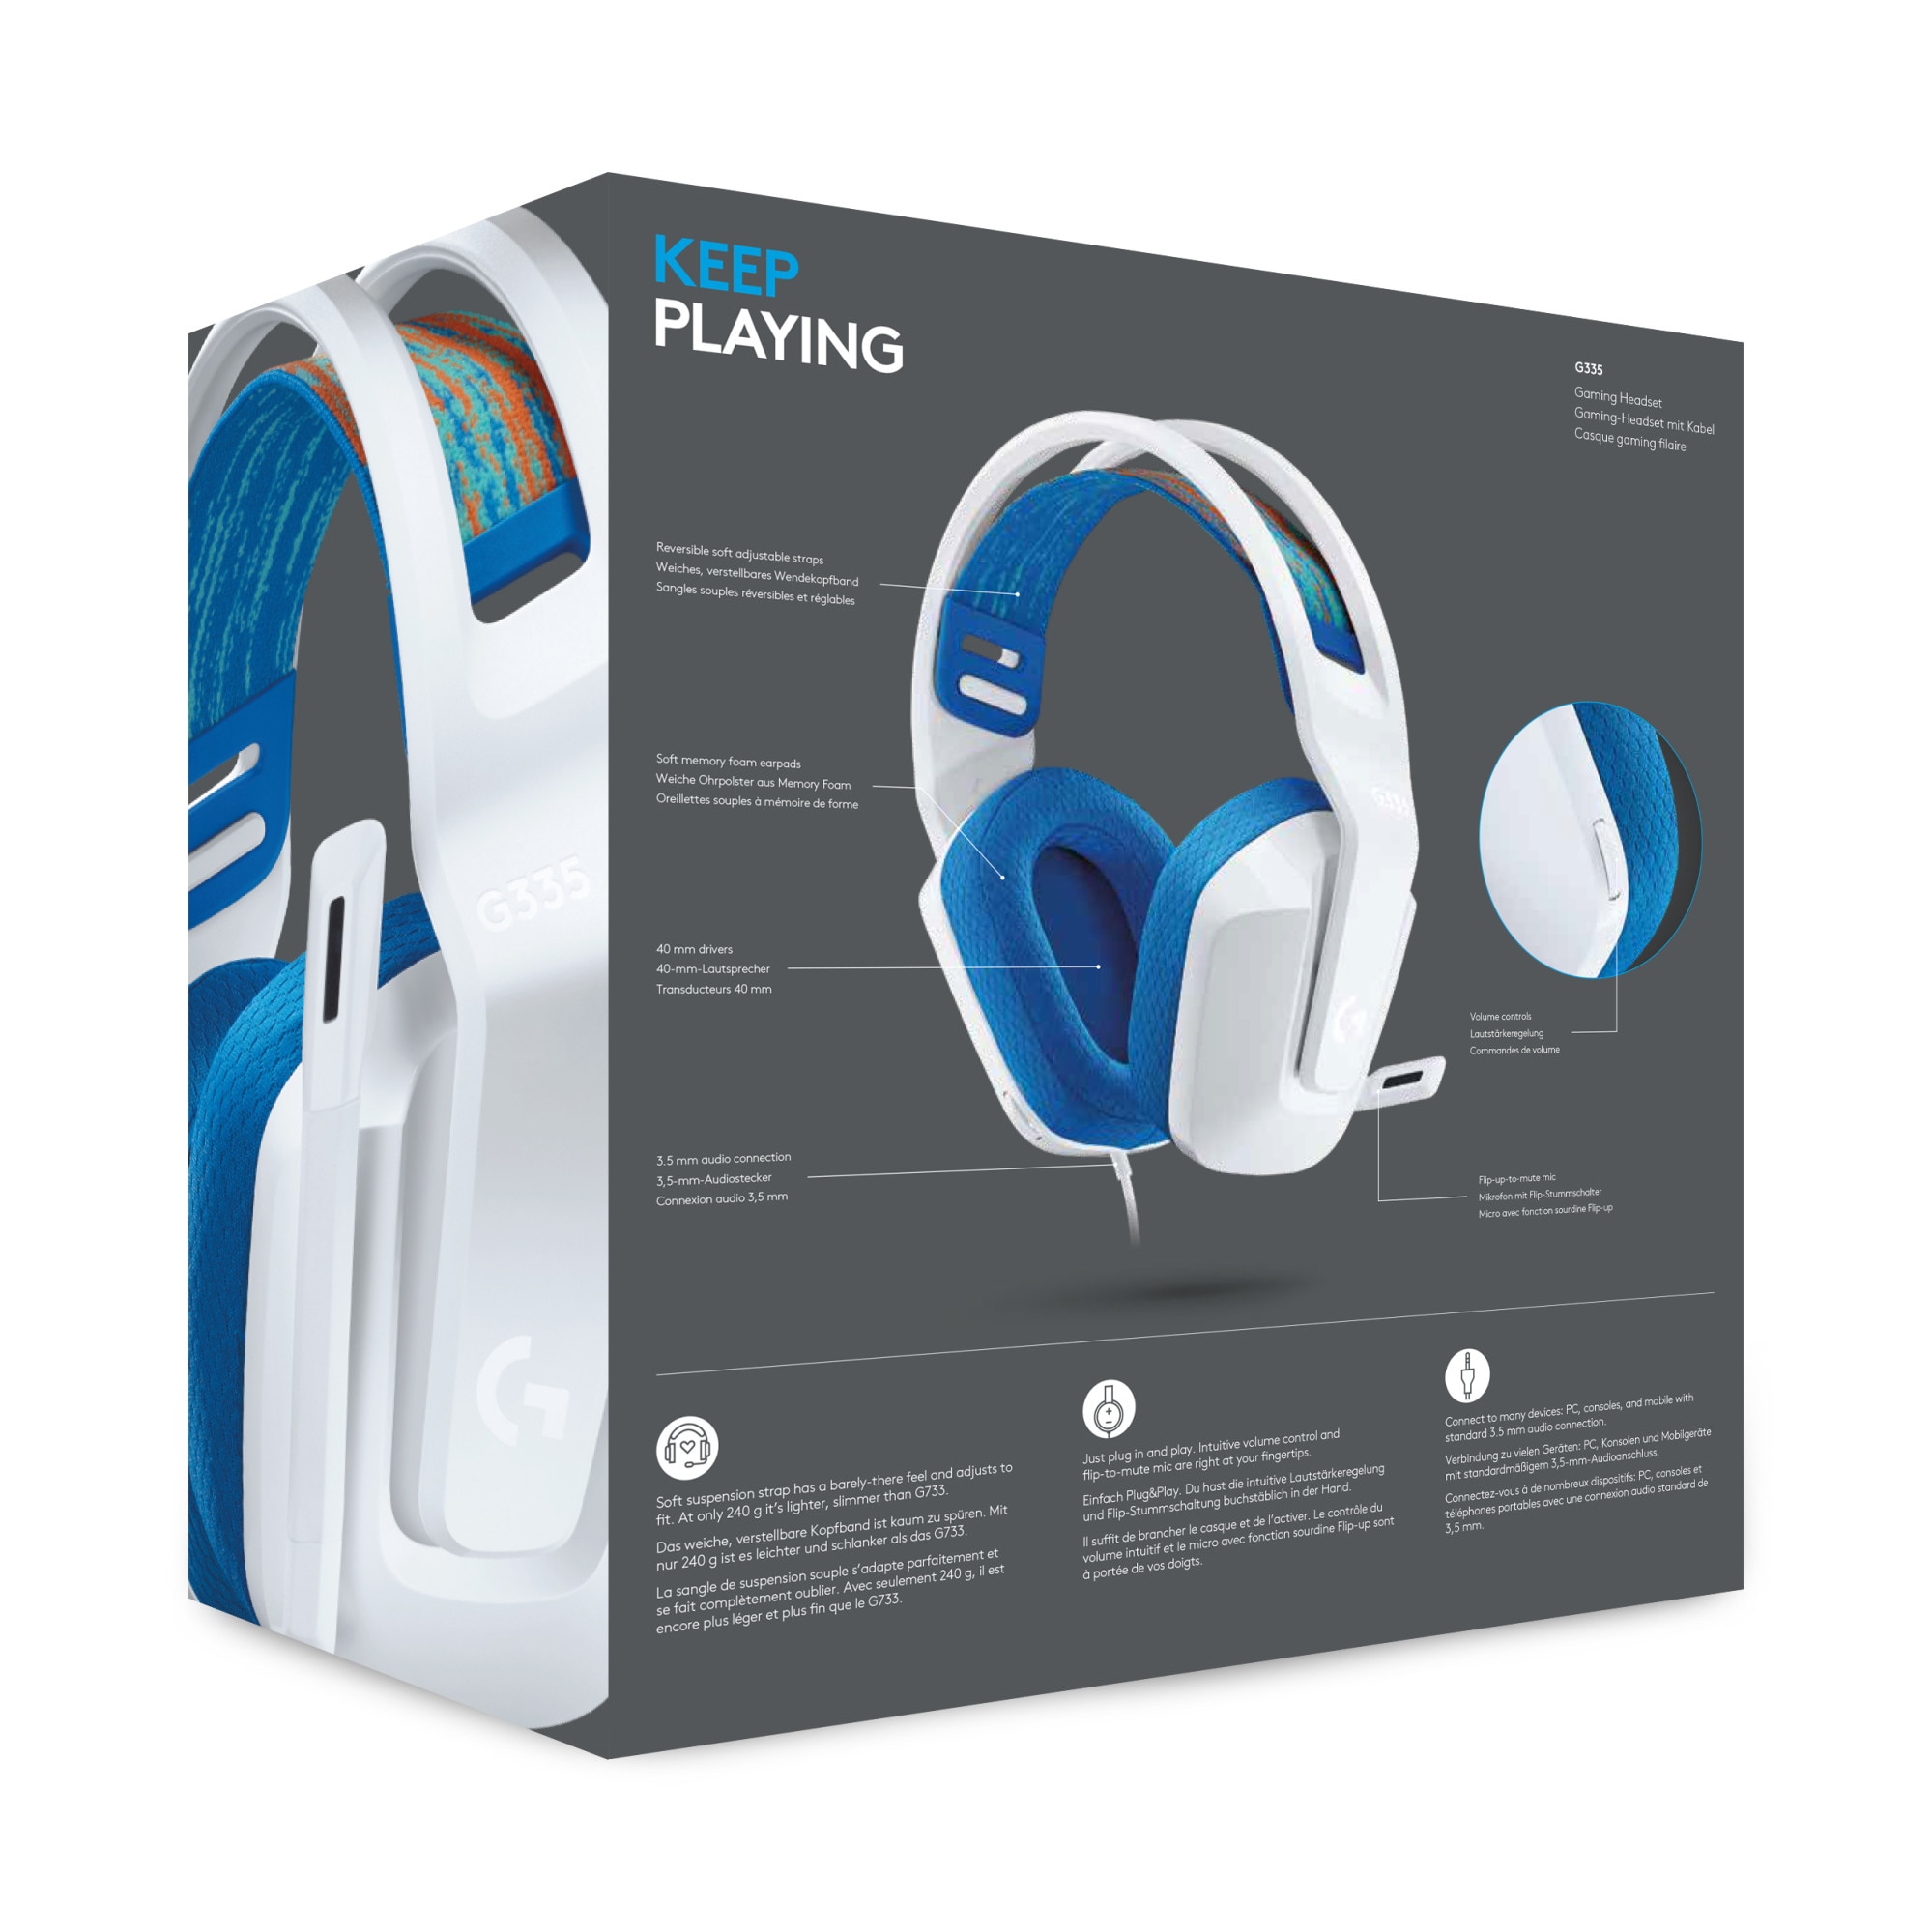 981-001018 - Casque gaming filaire Logitech G335 WHITE 